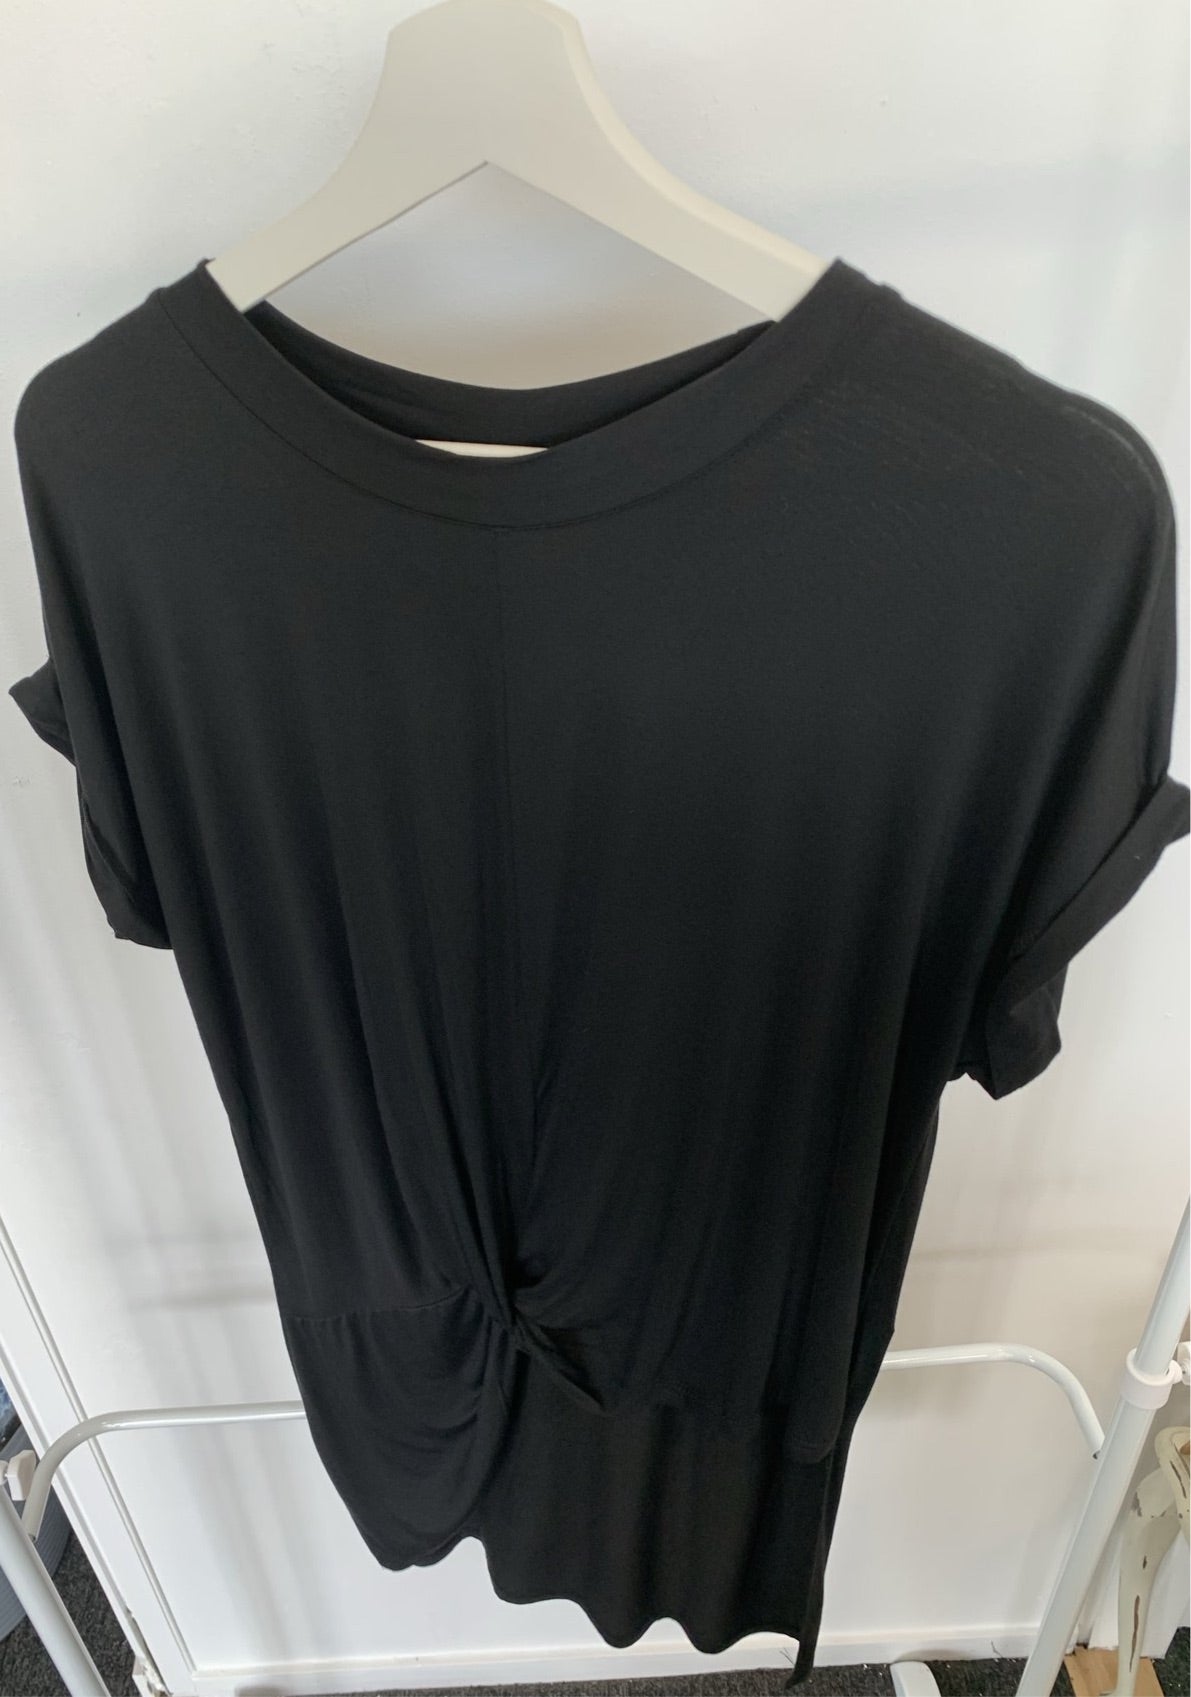 Silver Wishes Black Knot Twist Top with High Low Hemline Short Sleeves